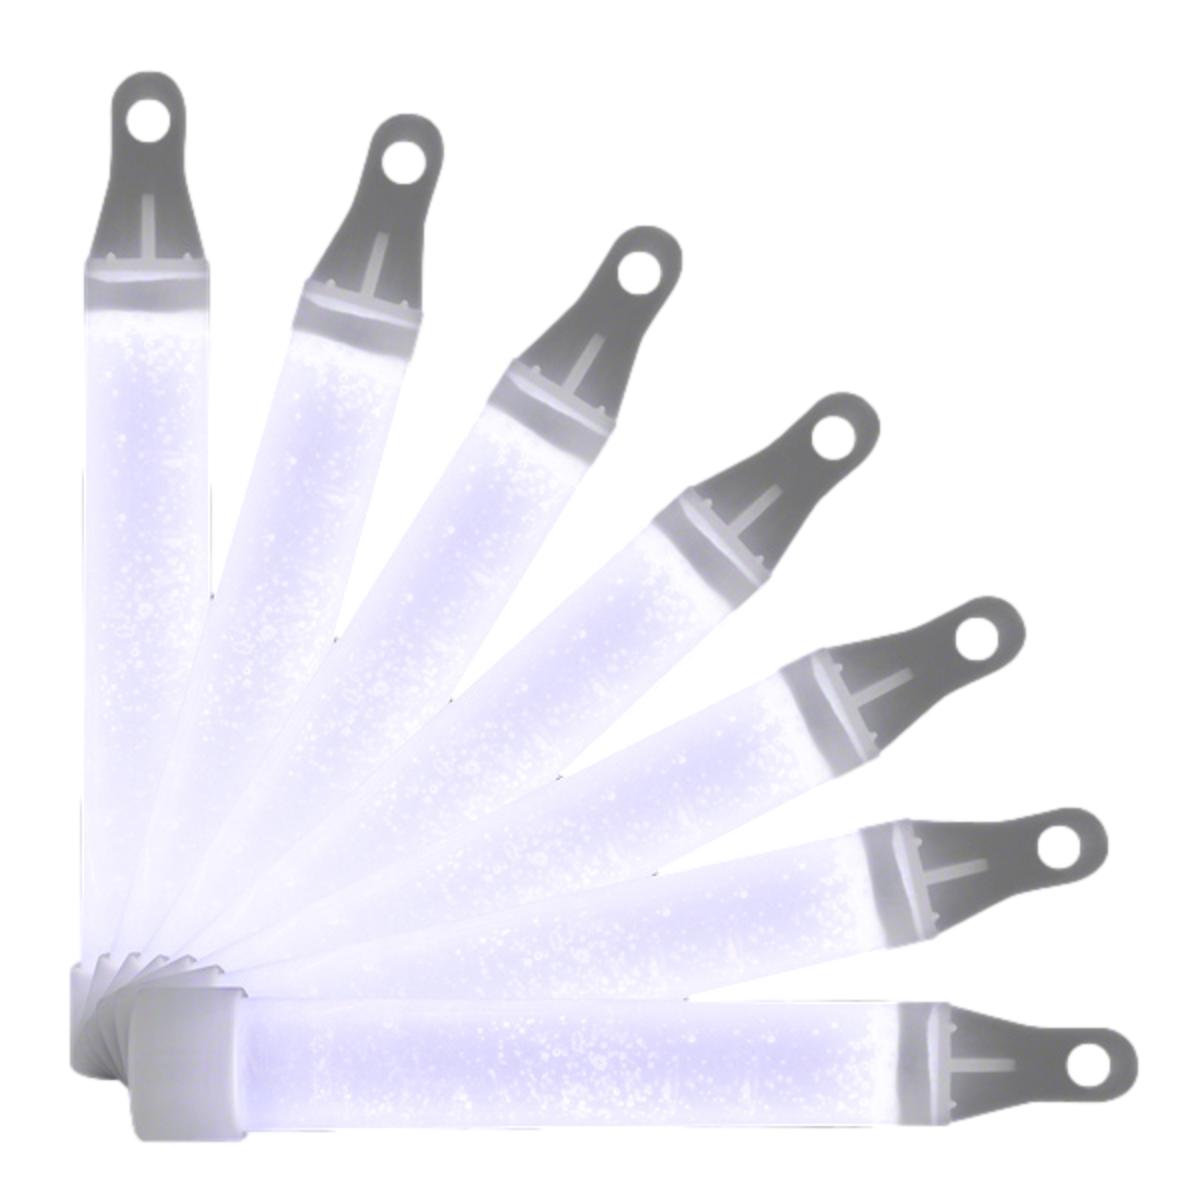 4 Inch GLOW STICK White Pack of 50